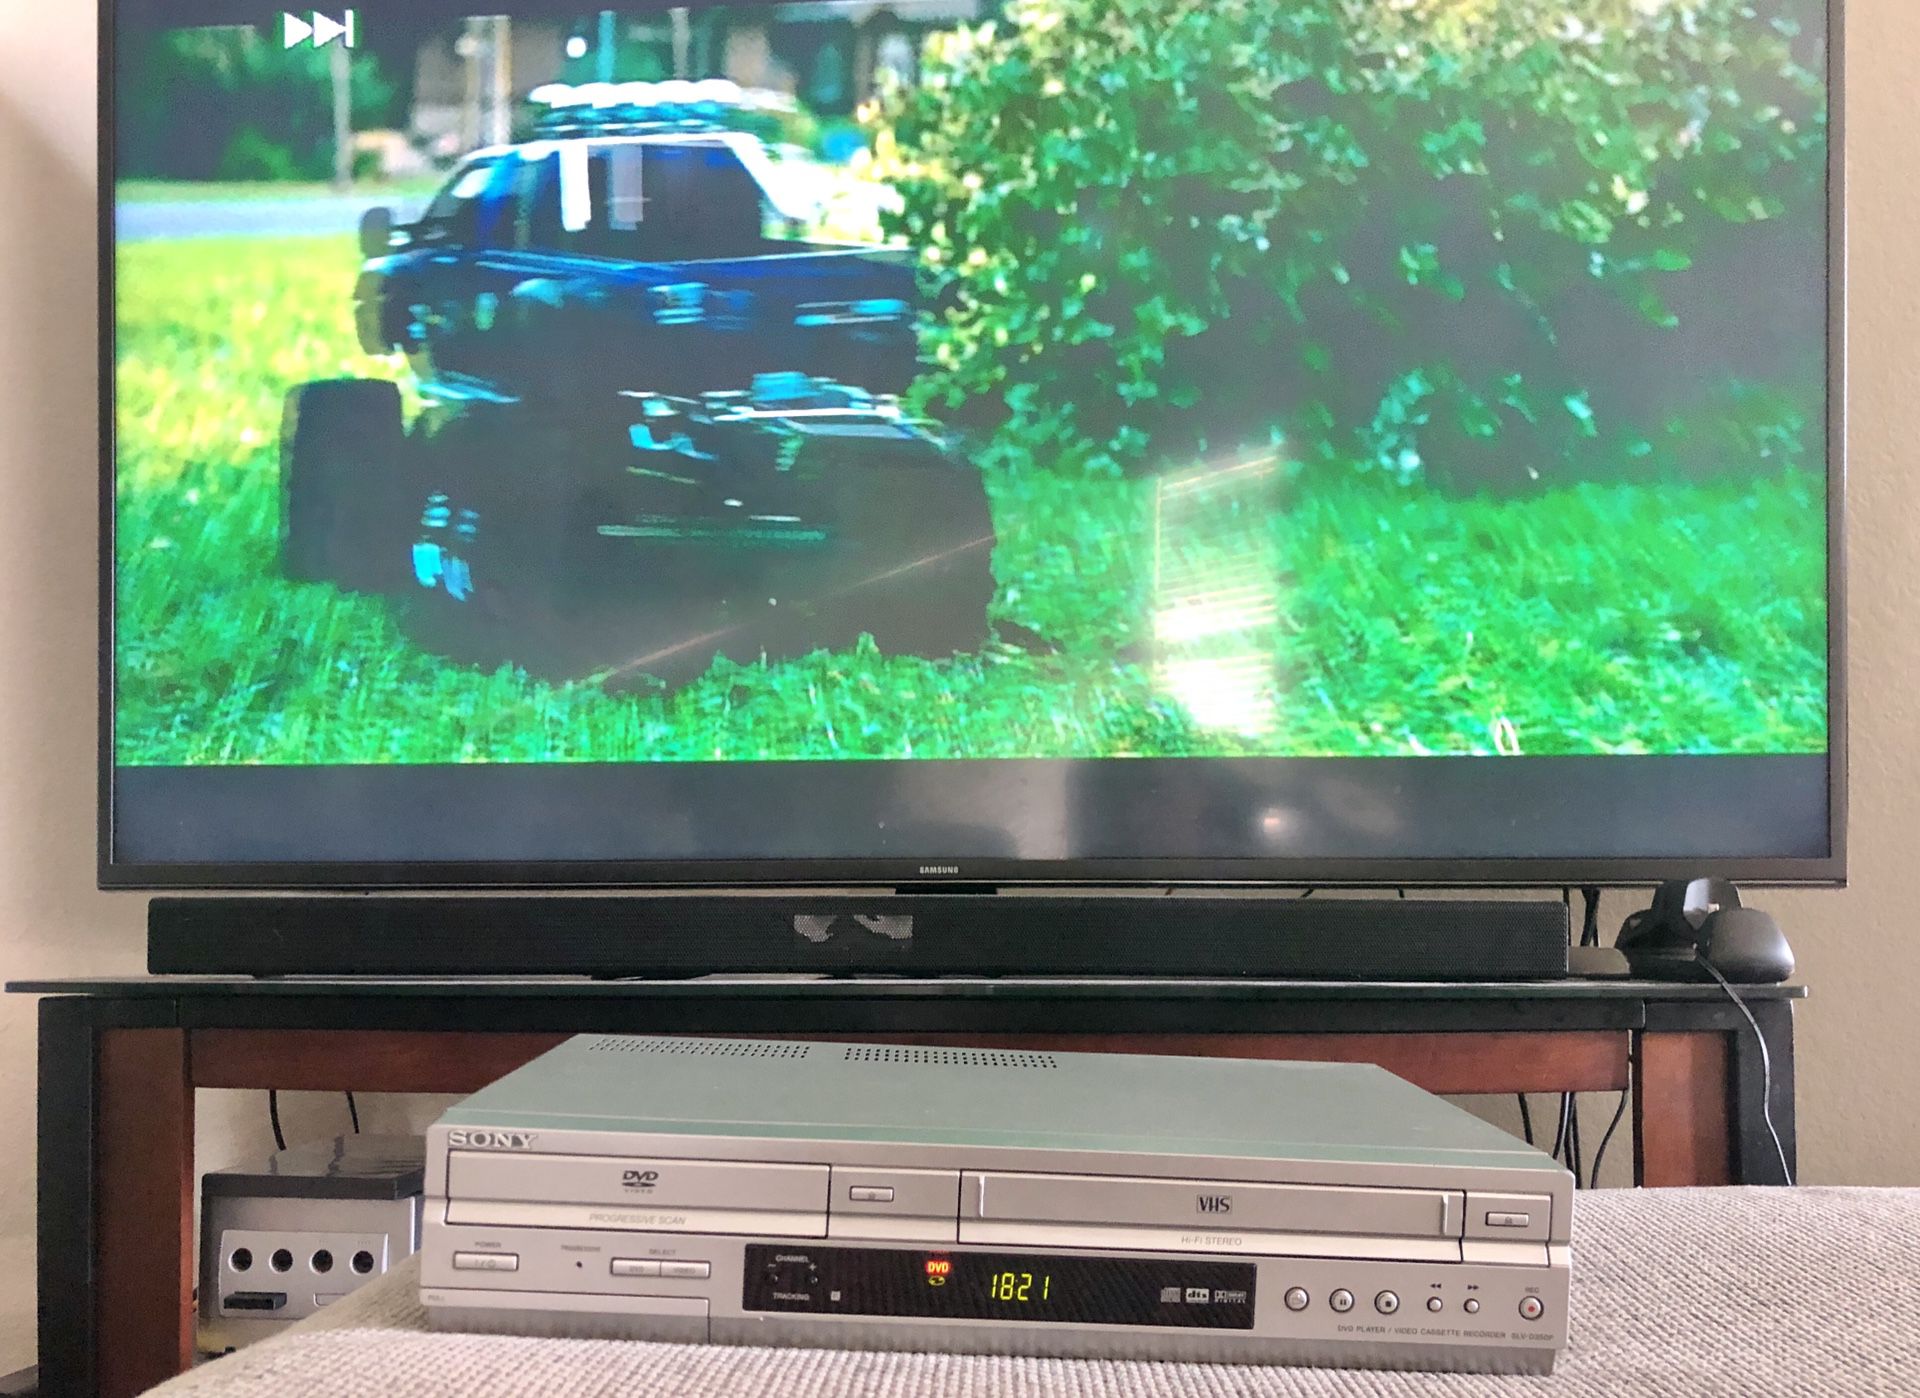 Sony SLV-D350P DVD Player/Video Cassette Recorder Tested Great Working Condition